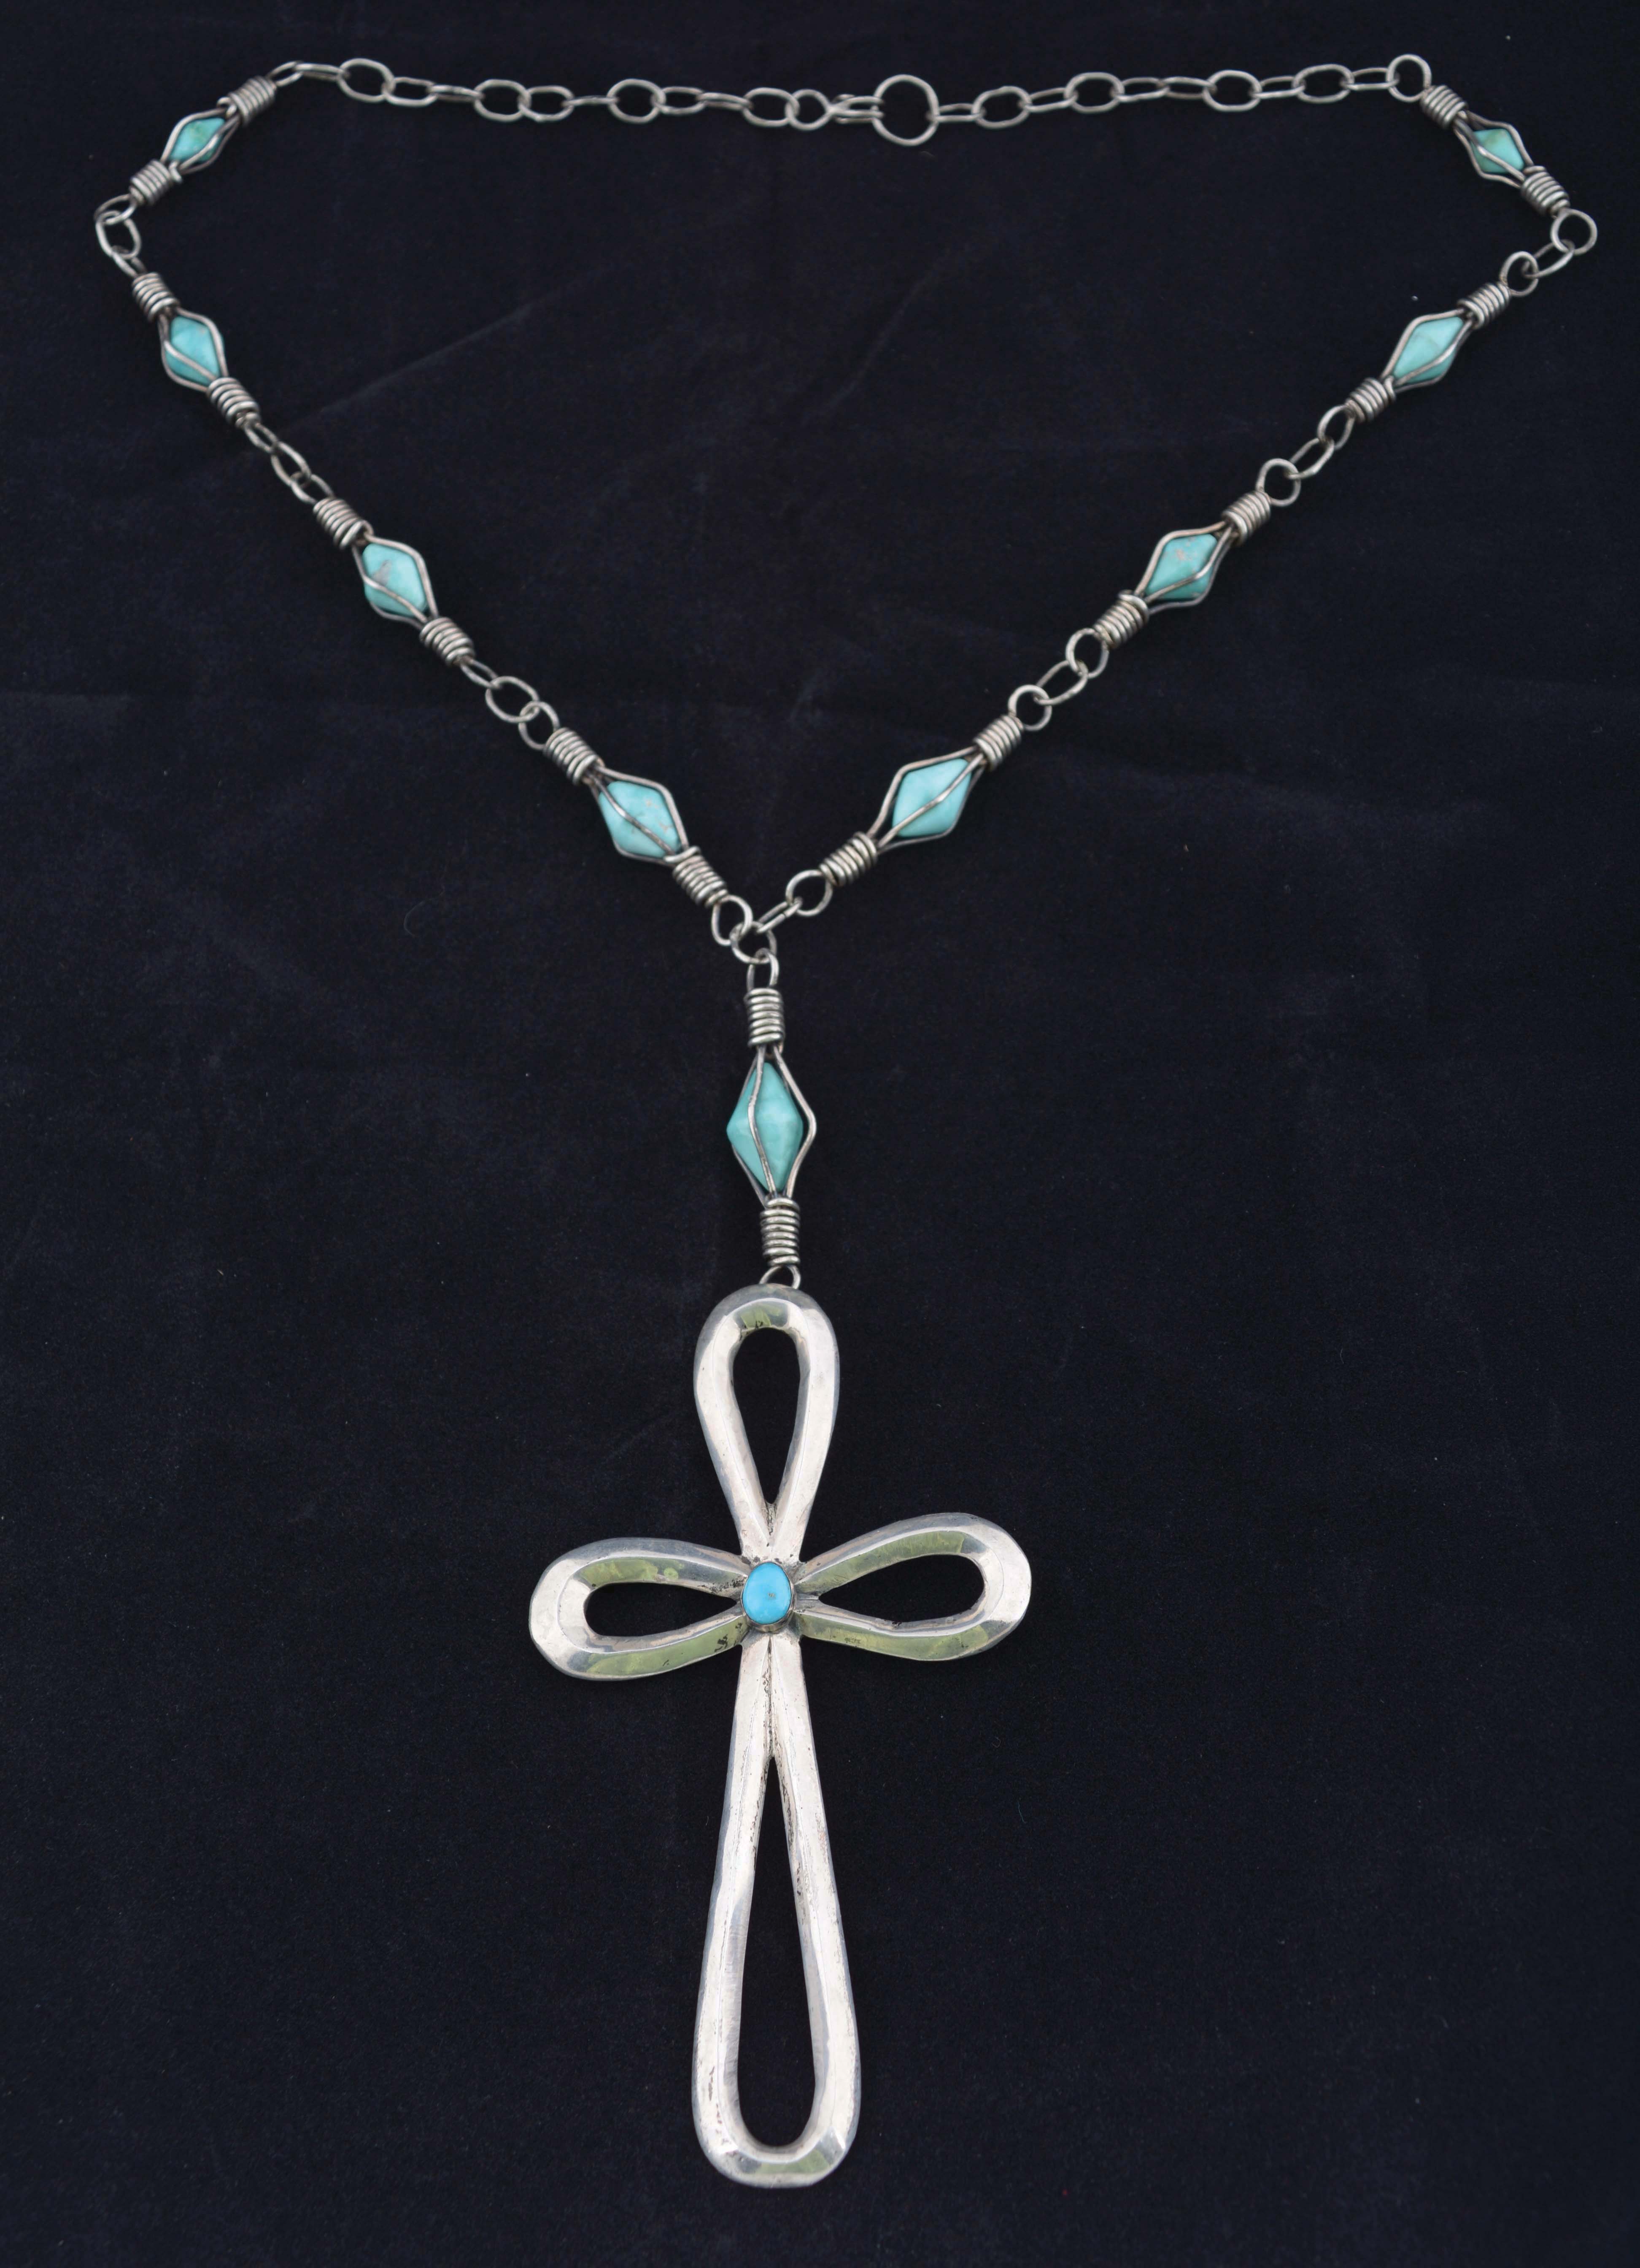 Silver And Turquoise Cross Necklace.